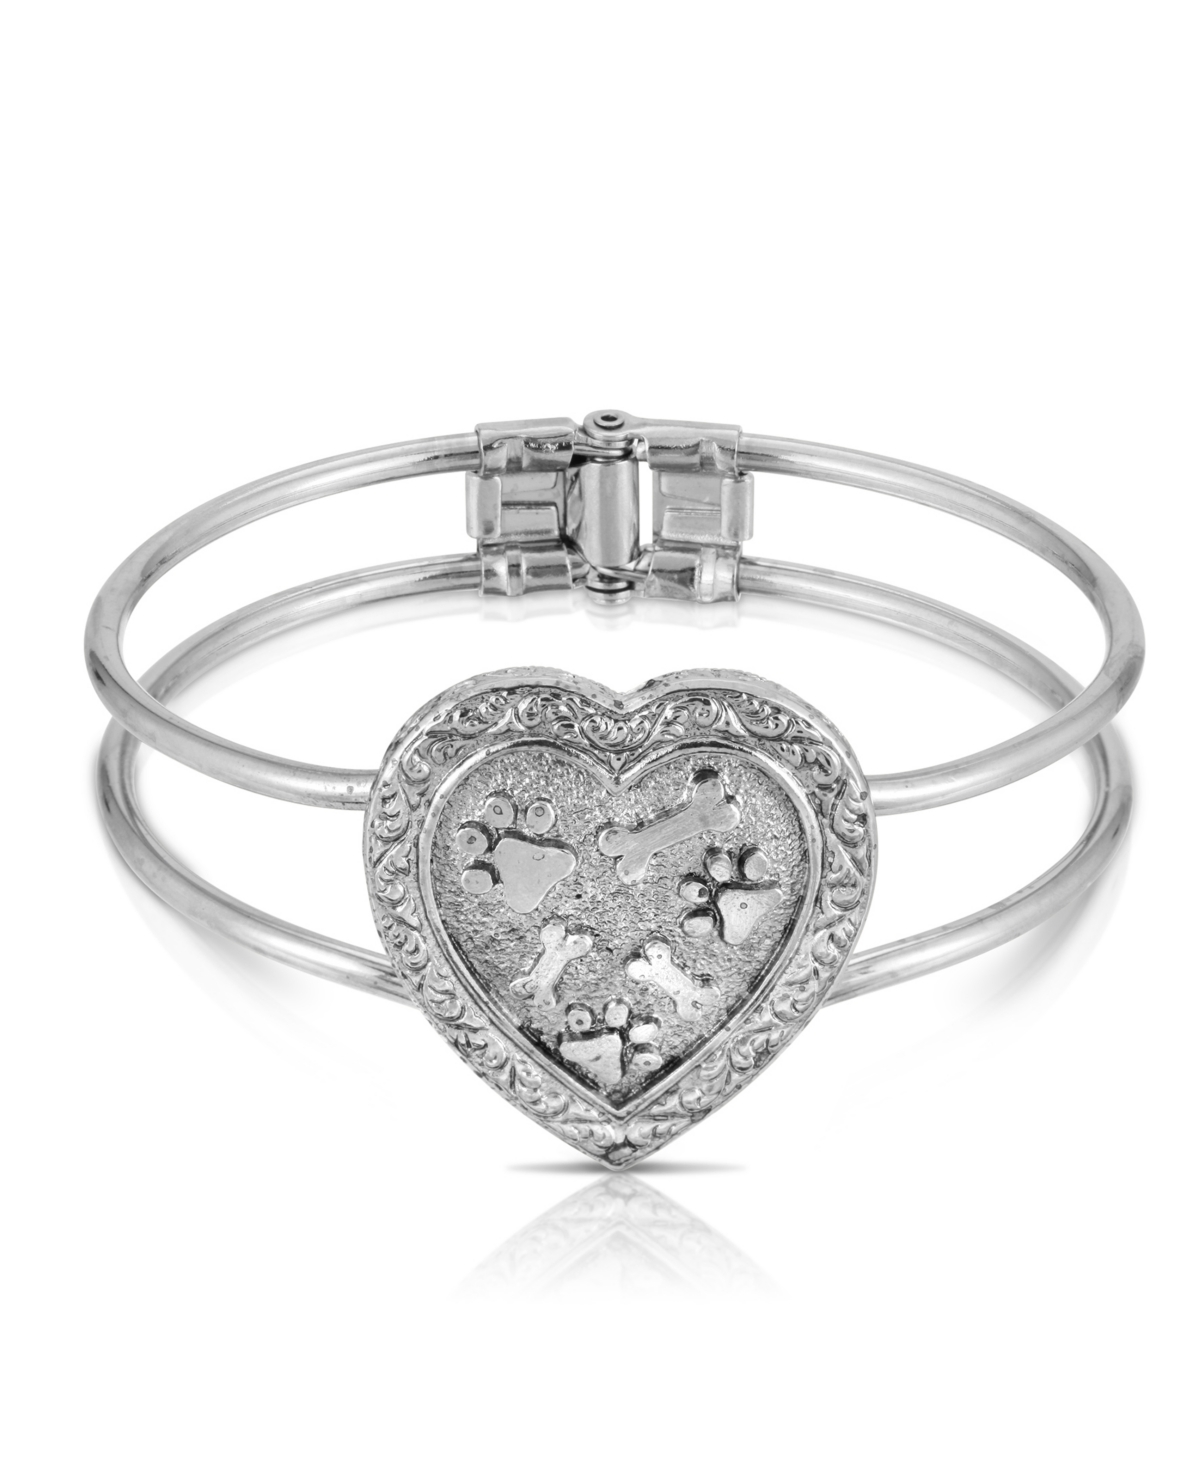 Pewter Heart Paws and Bones Cuff Bracelet - Silver